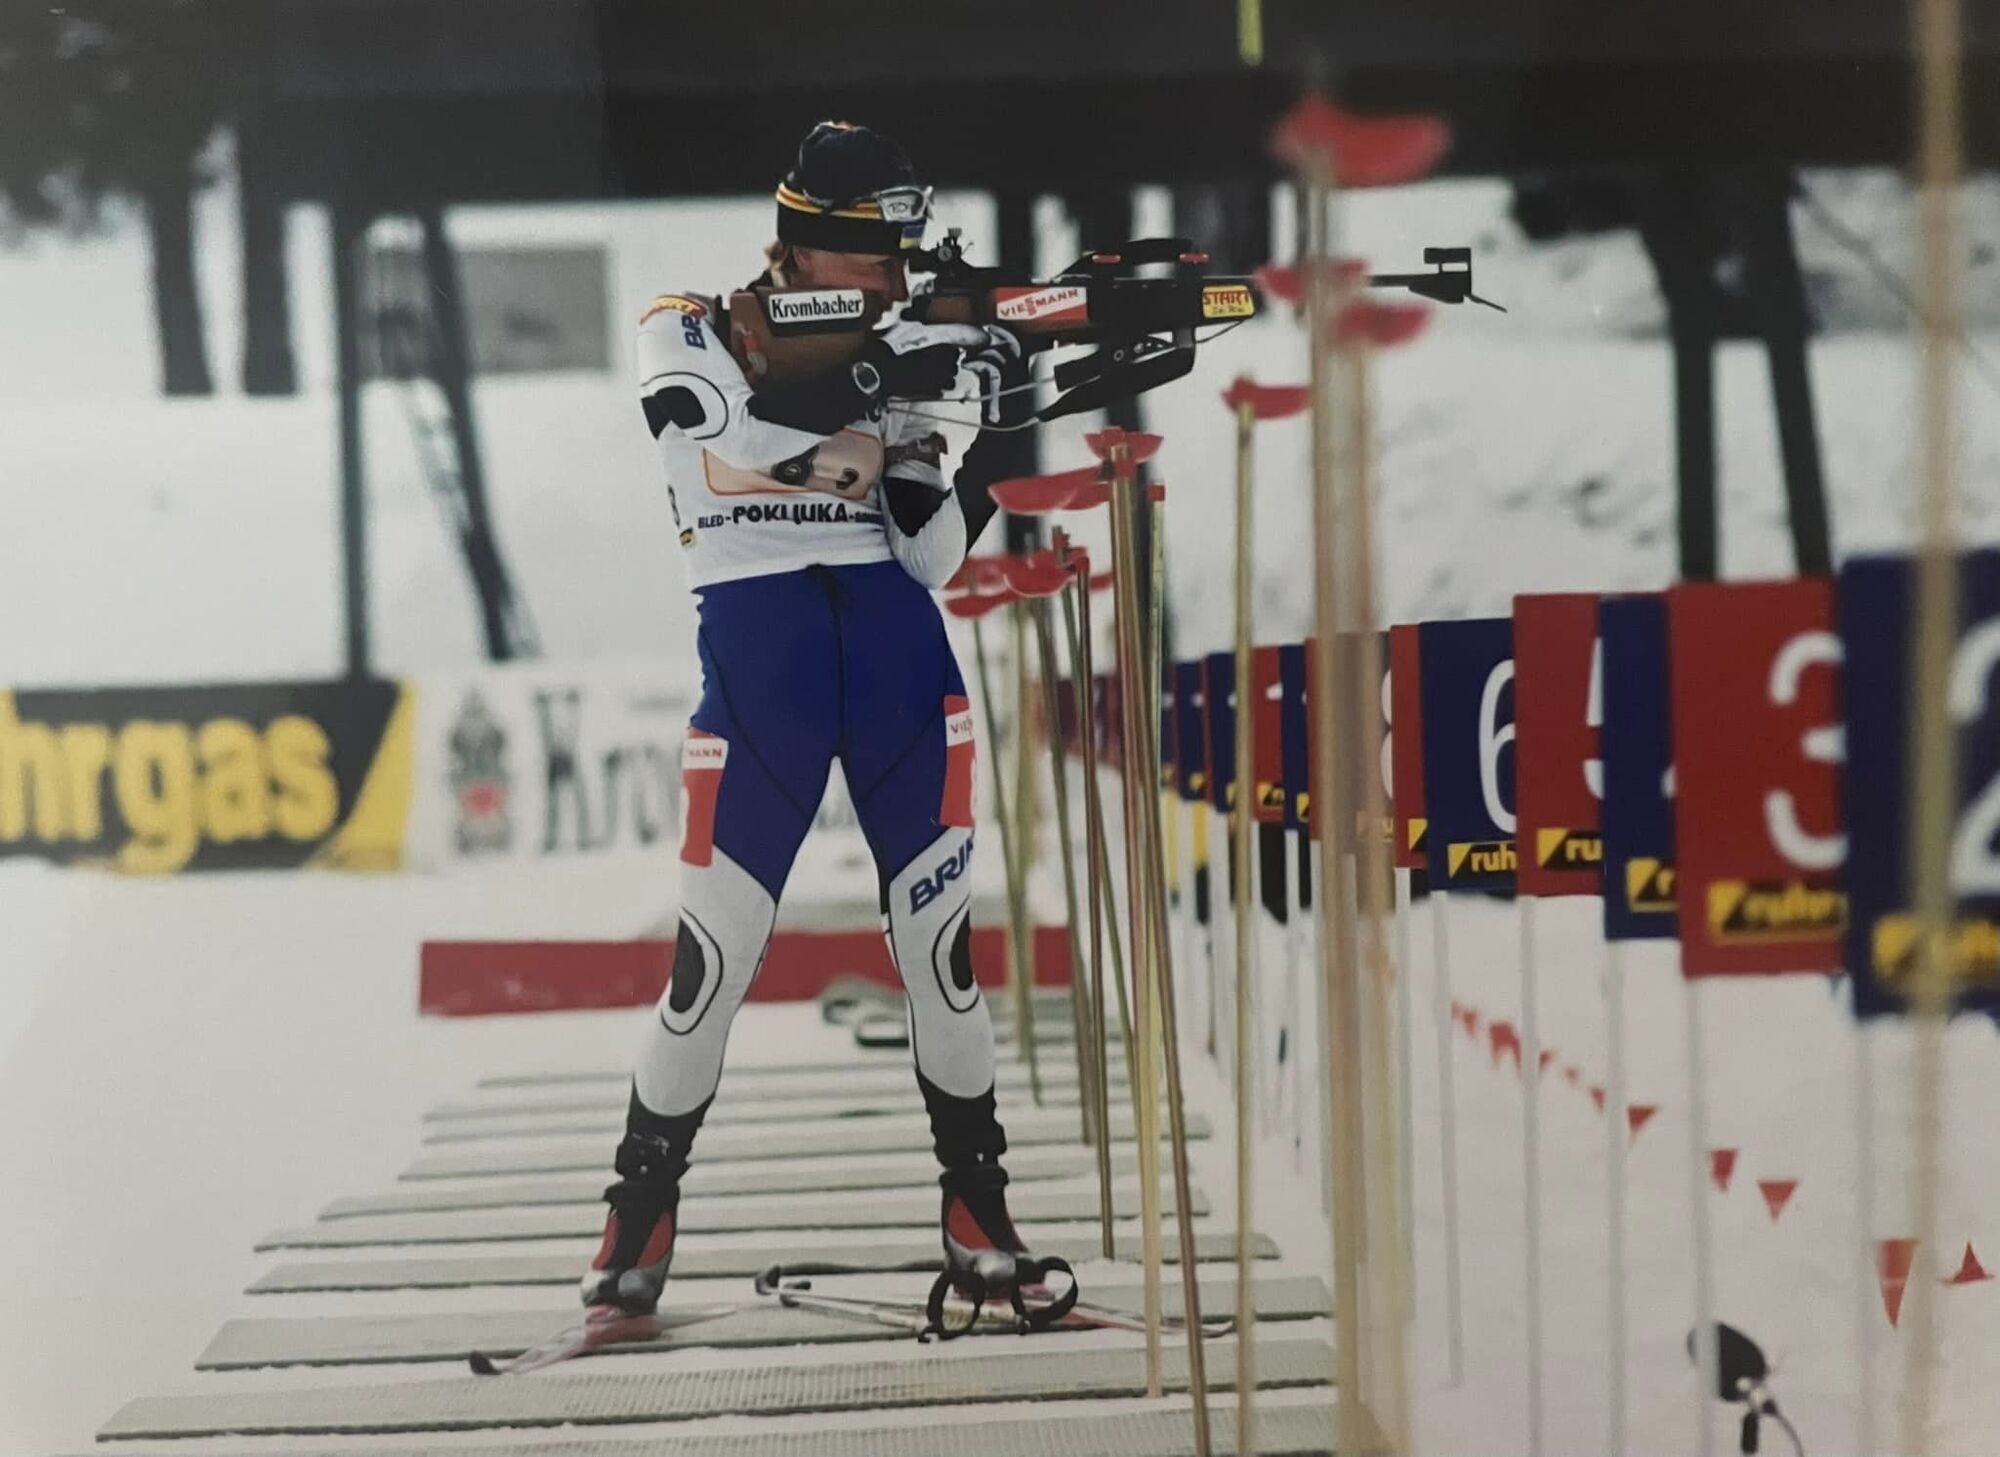 Famous Ukrainian biathlete went into politics: how the world championships medalist who withstood the siege of Russians in Chernihiv has changed